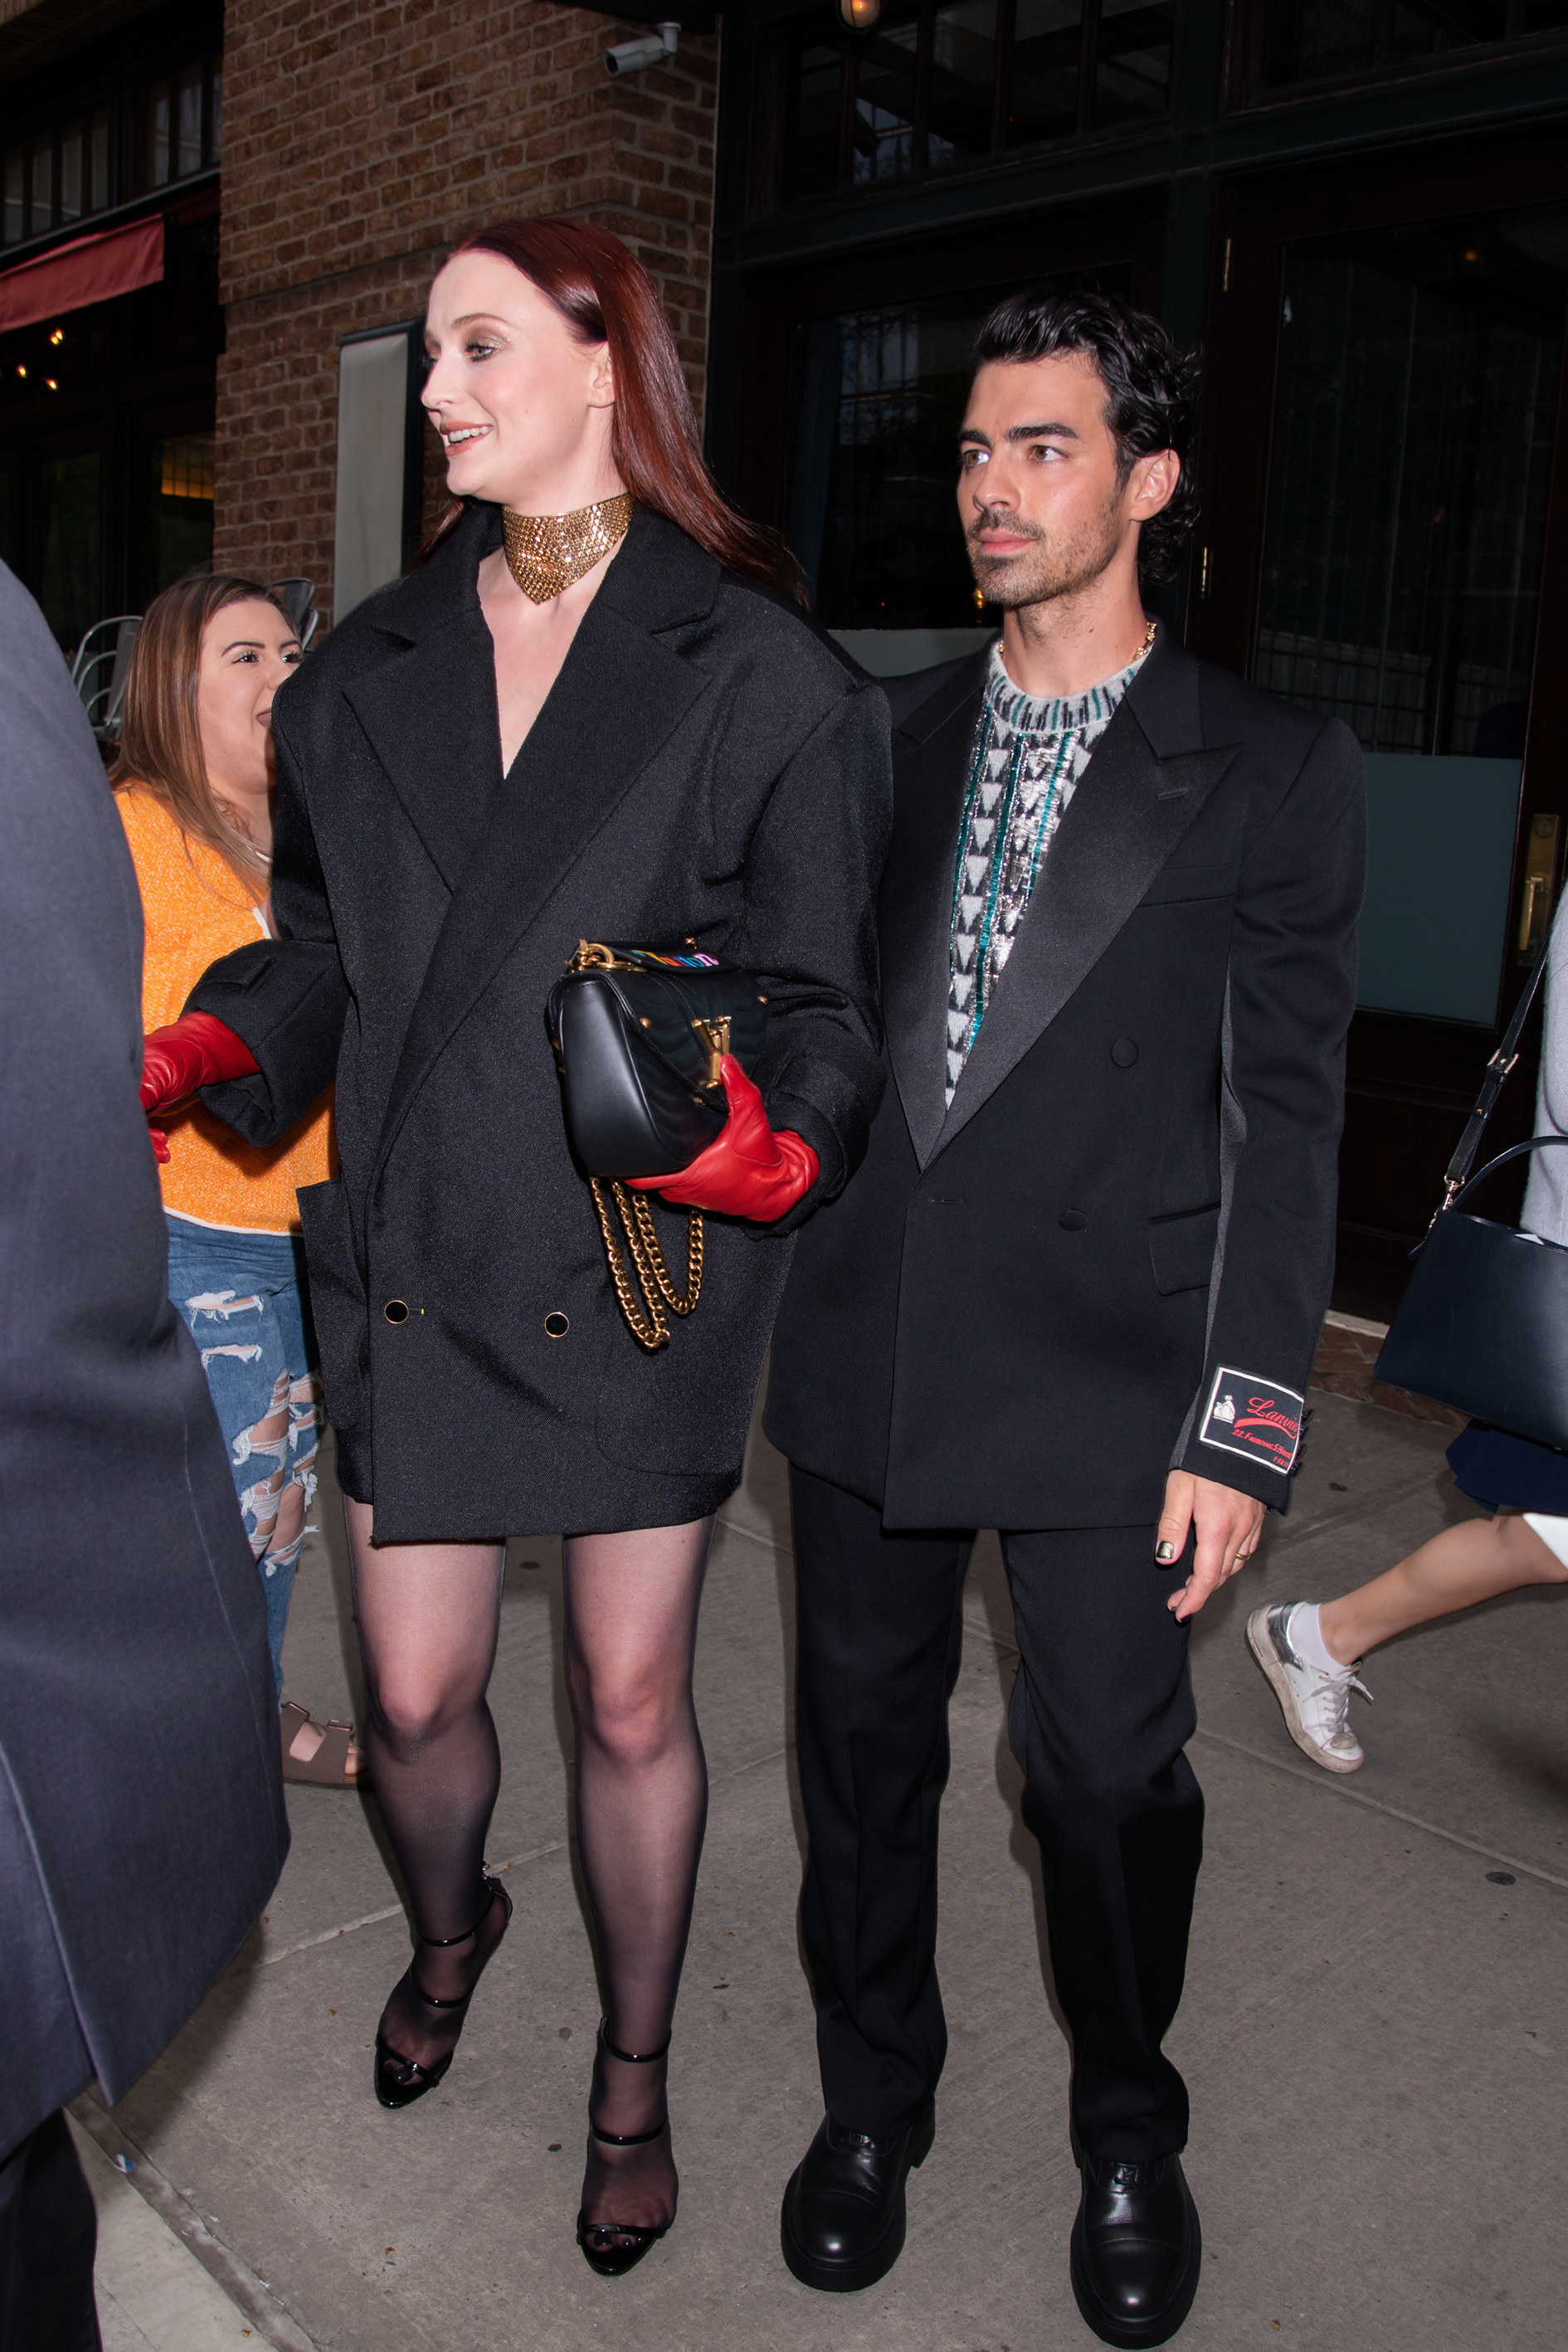 Sophie and Joe on the street